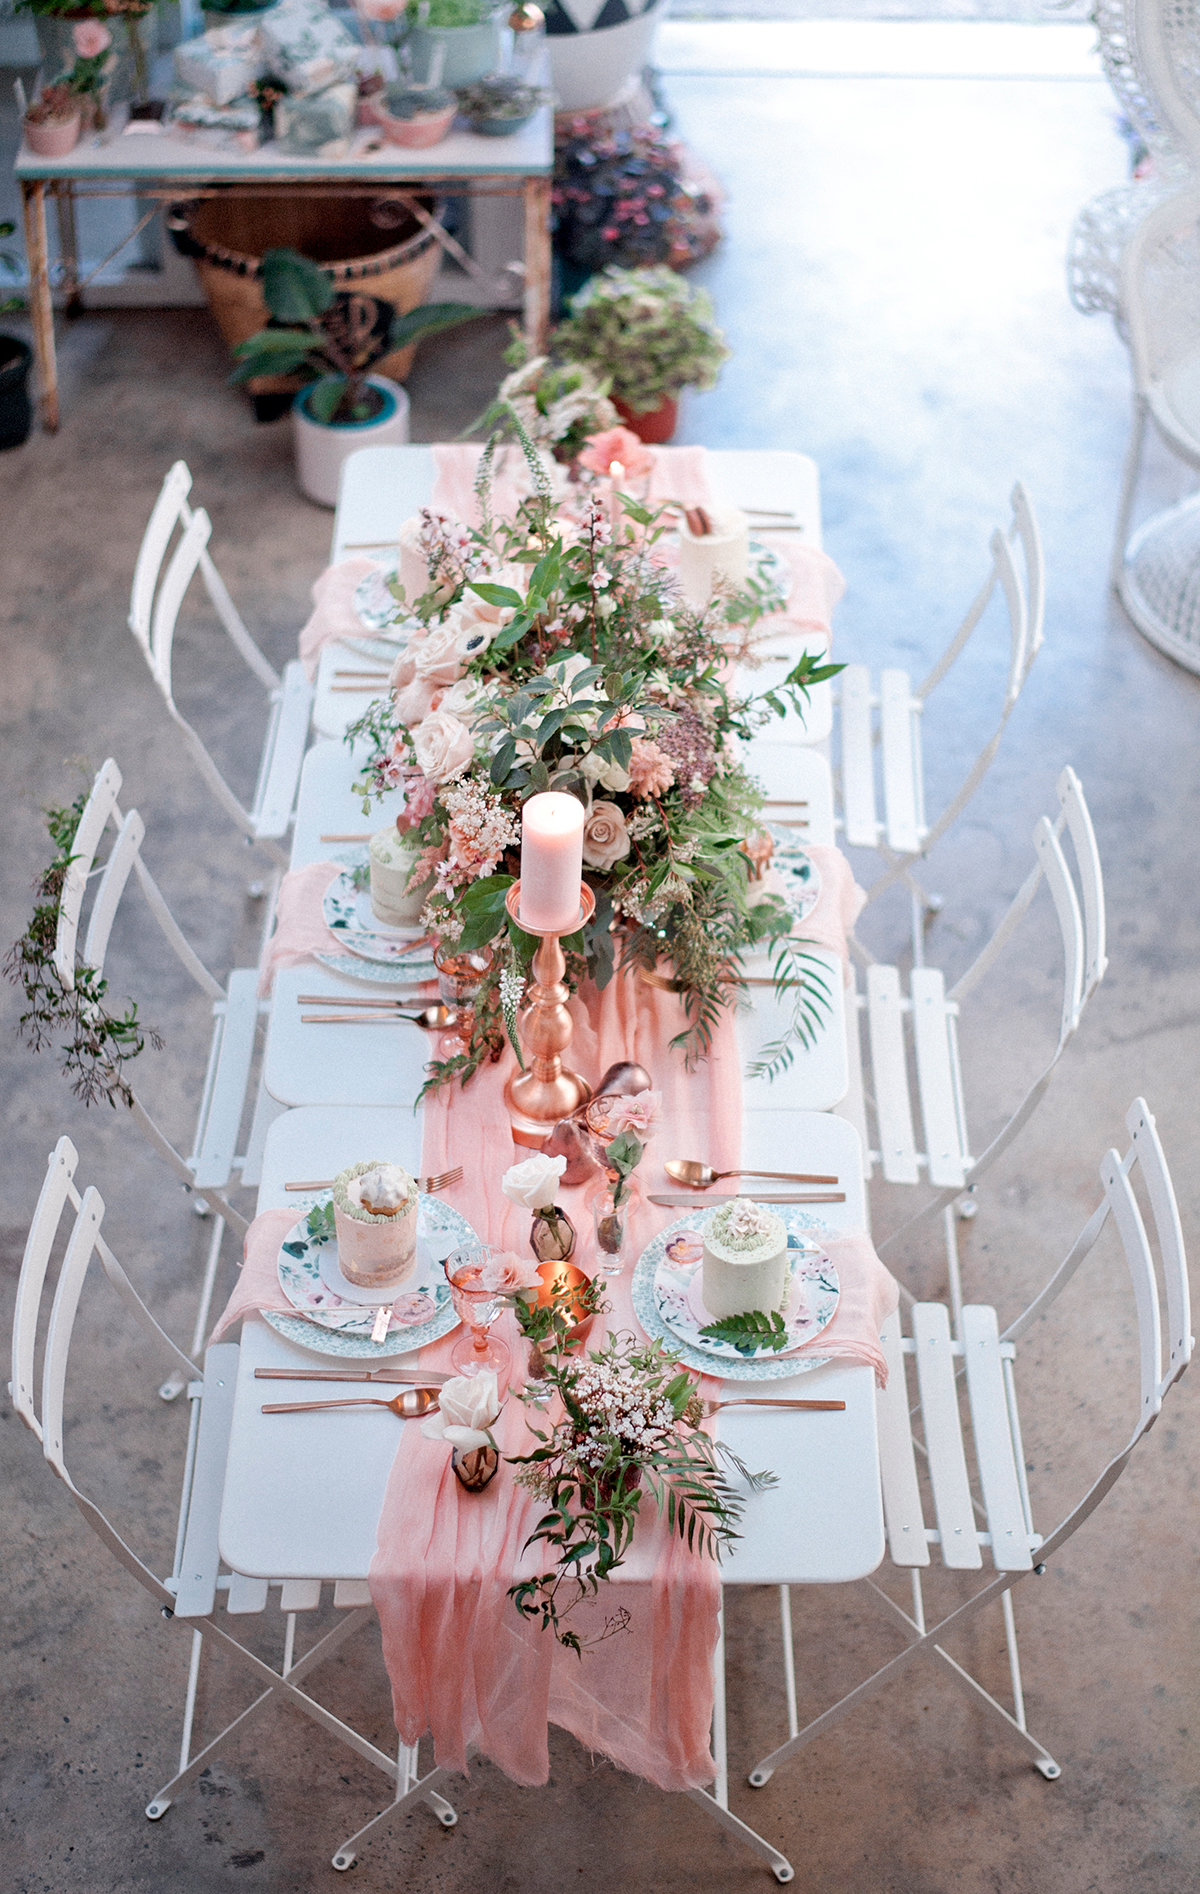 A table setting with flowers and a pink table runner as an idea for bridal shower decorations